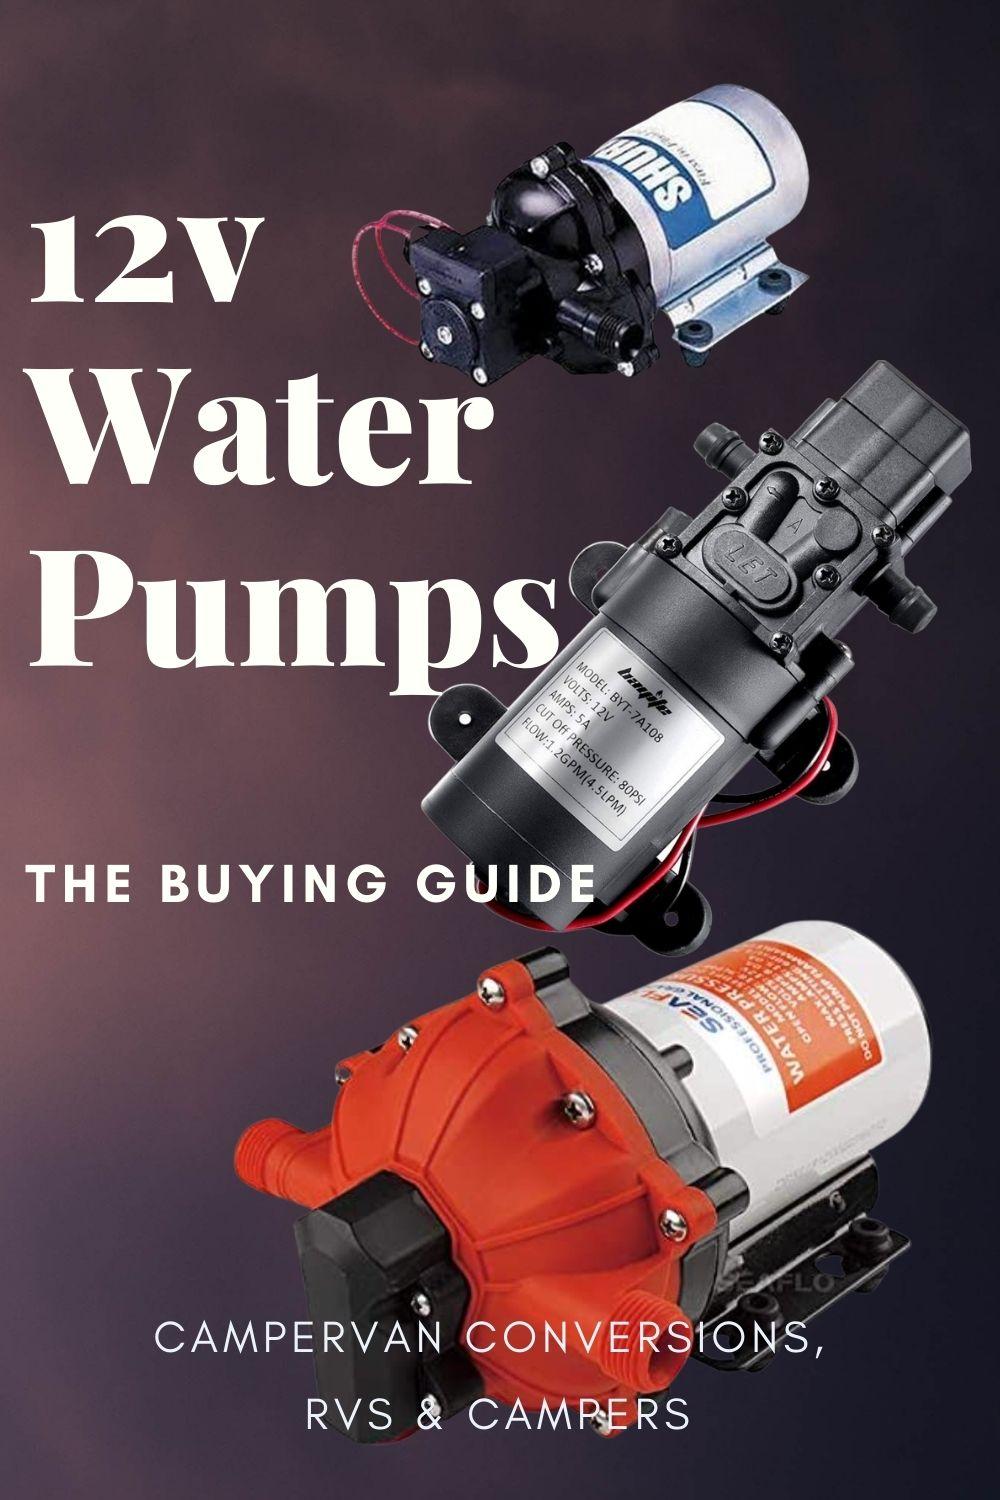 Best 12V RV Water Pumps (Review & Buying Guide) in 2022